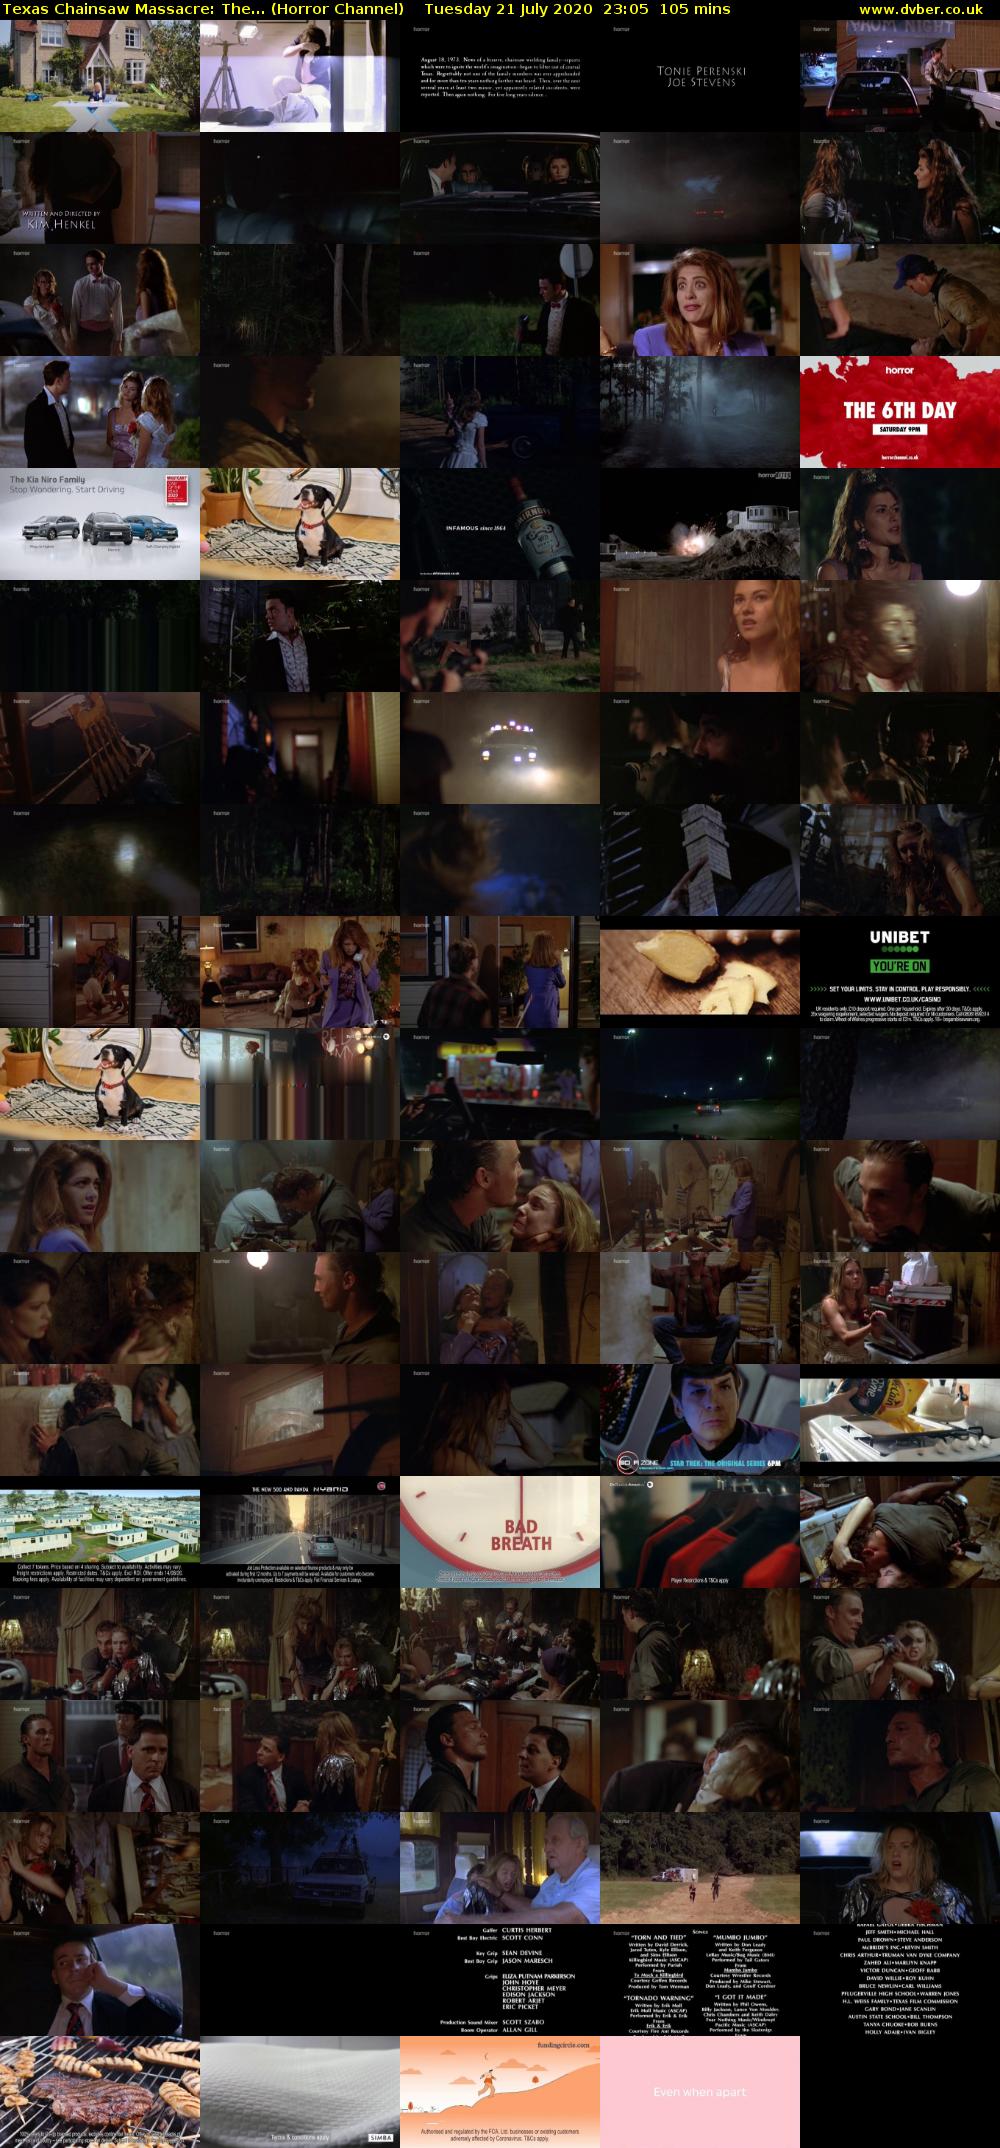 Texas Chainsaw Massacre: The... (Horror Channel) Tuesday 21 July 2020 23:05 - 00:50